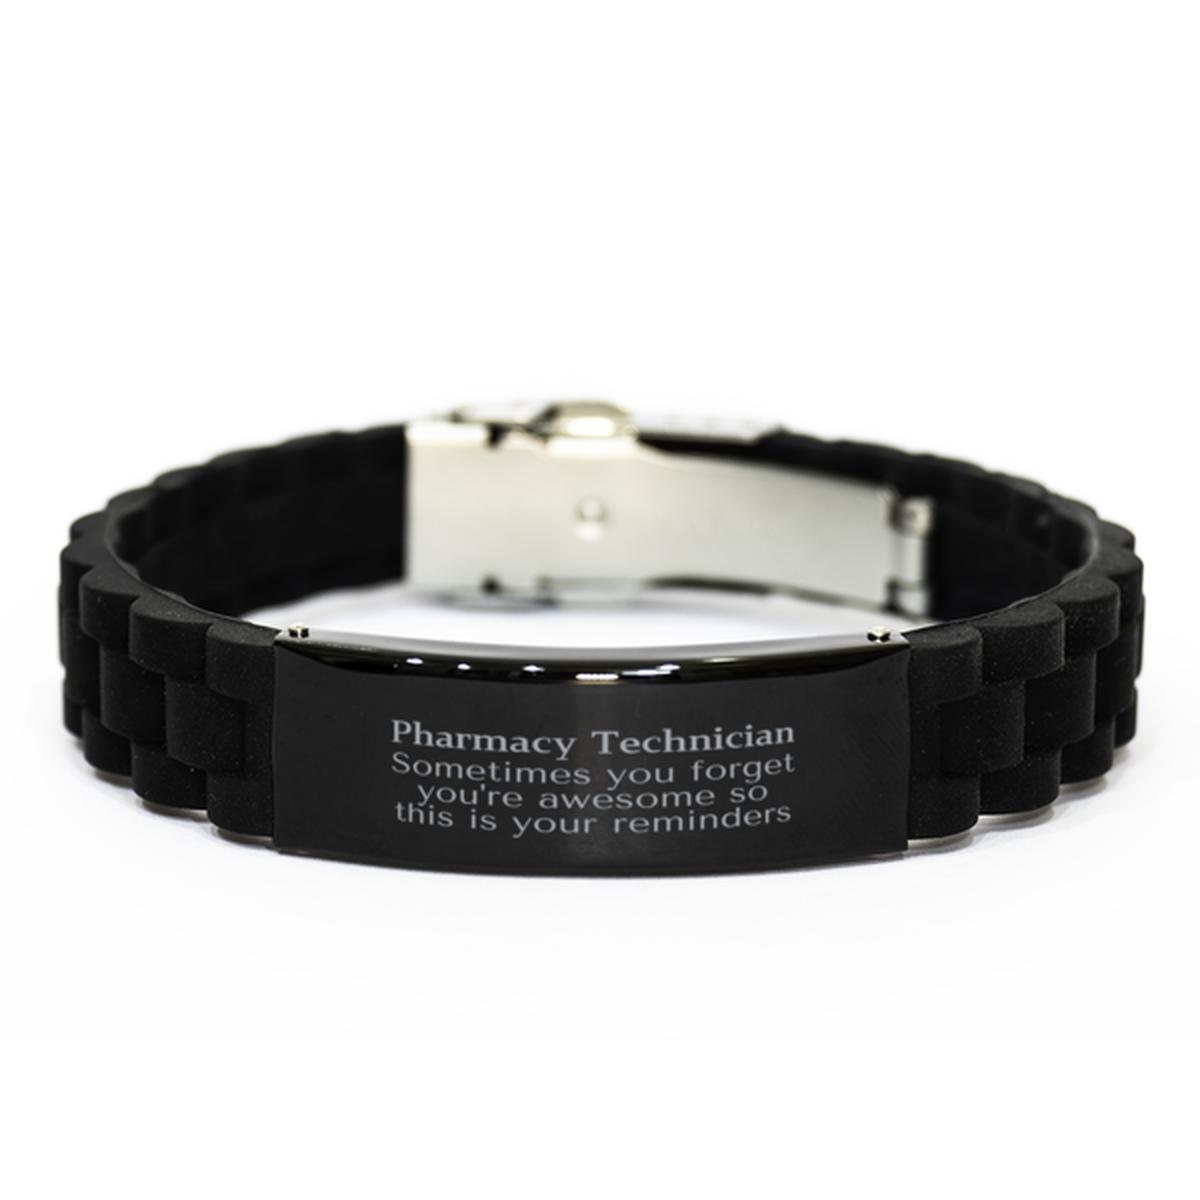 Sentimental Pharmacy Technician Black Glidelock Clasp Bracelet, Pharmacy Technician Sometimes you forget you're awesome so this is your reminders, Graduation Christmas Birthday Gifts for Pharmacy Technician, Men, Women, Coworkers